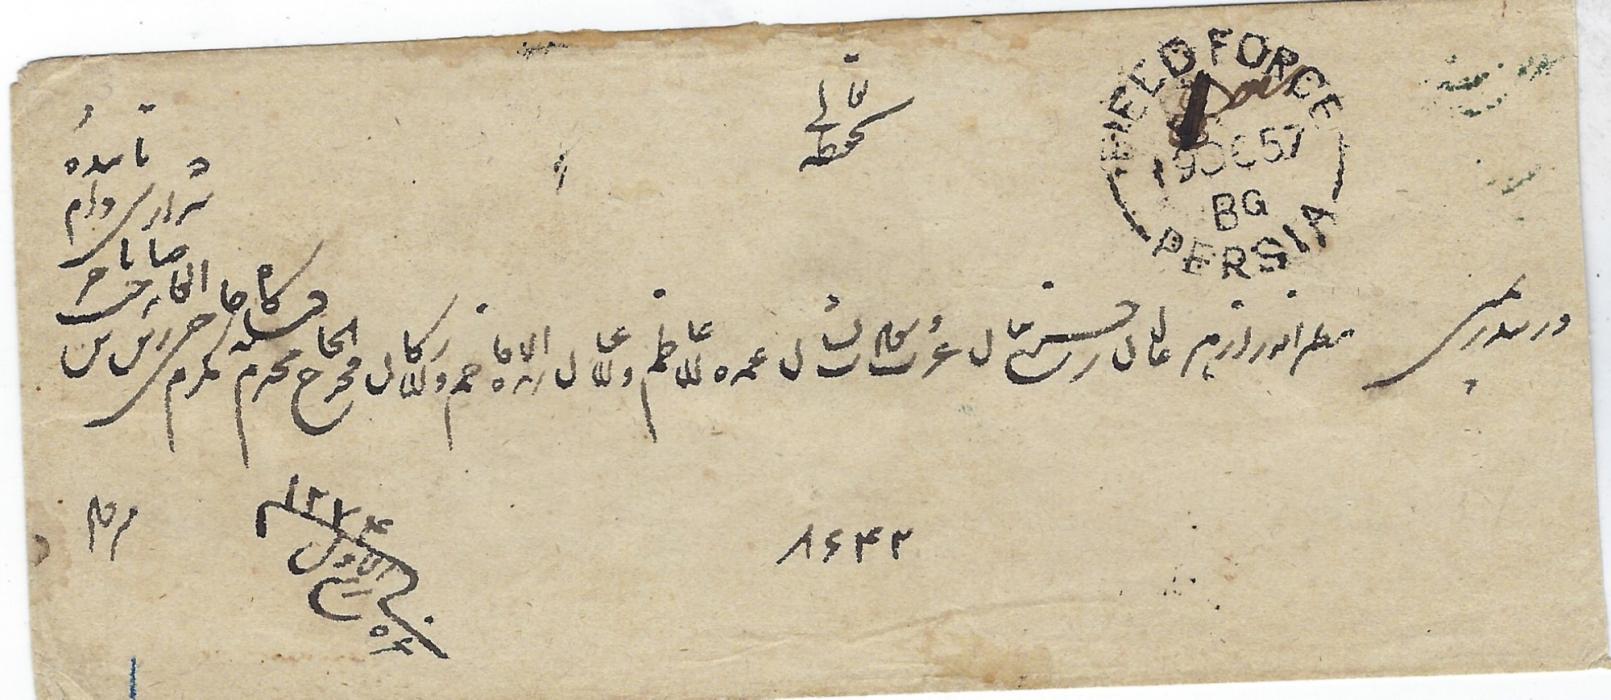 India (Persian Gulf) 1857 (19 OC) cover from Kharg Island to Bombay, showing a “8d” charge altered to “1d.” and cancelled by fine Field Force Persia date stamp, Bombay arrival backstamp of NO 7; fine and scarce.